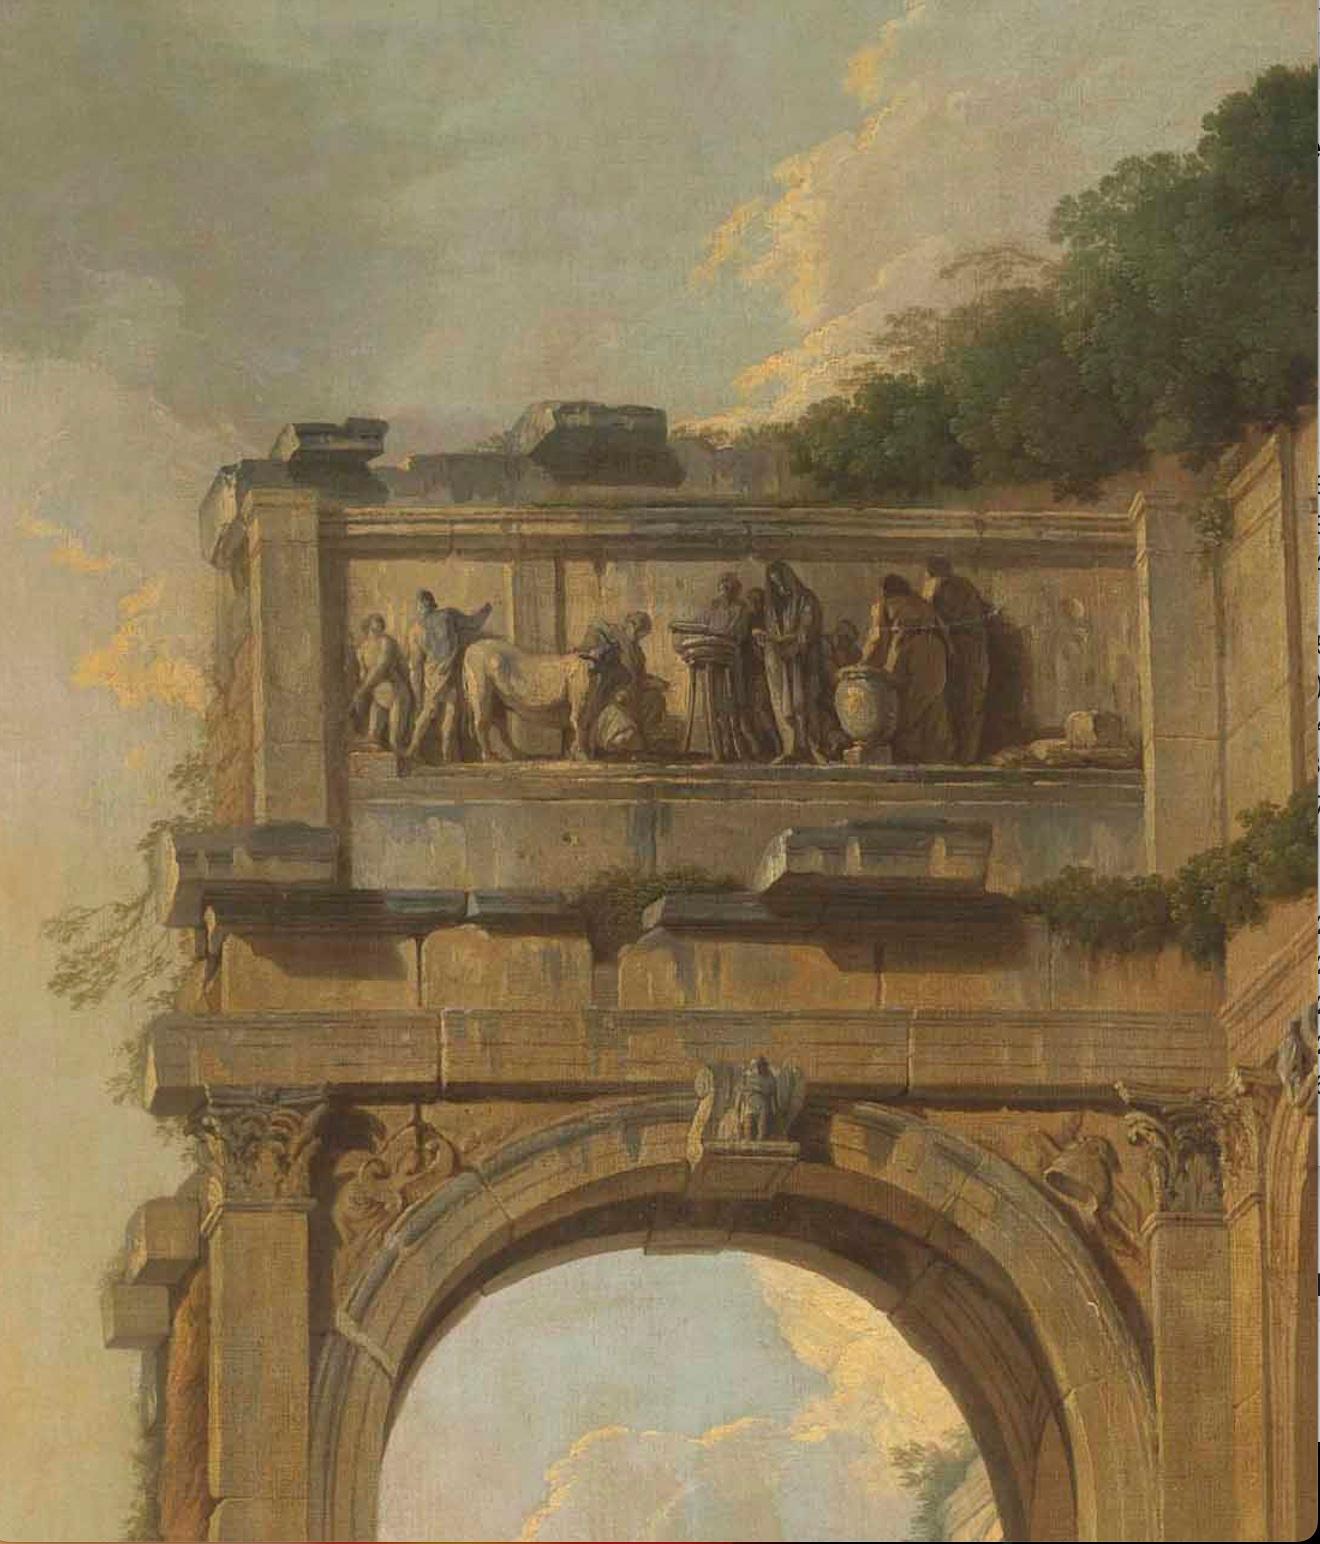 Circle of Giovanni Paolo Panini (Piacenza 1691-1765 Rome)
An architectural capriccio with an Apostle preaching
oil on canvas
Measures : 72 ¾ x 58 ½ in. (184.6 x 148.6 cm.)

Giovanni Paolo Pannini is an Italian painter and architect, known for